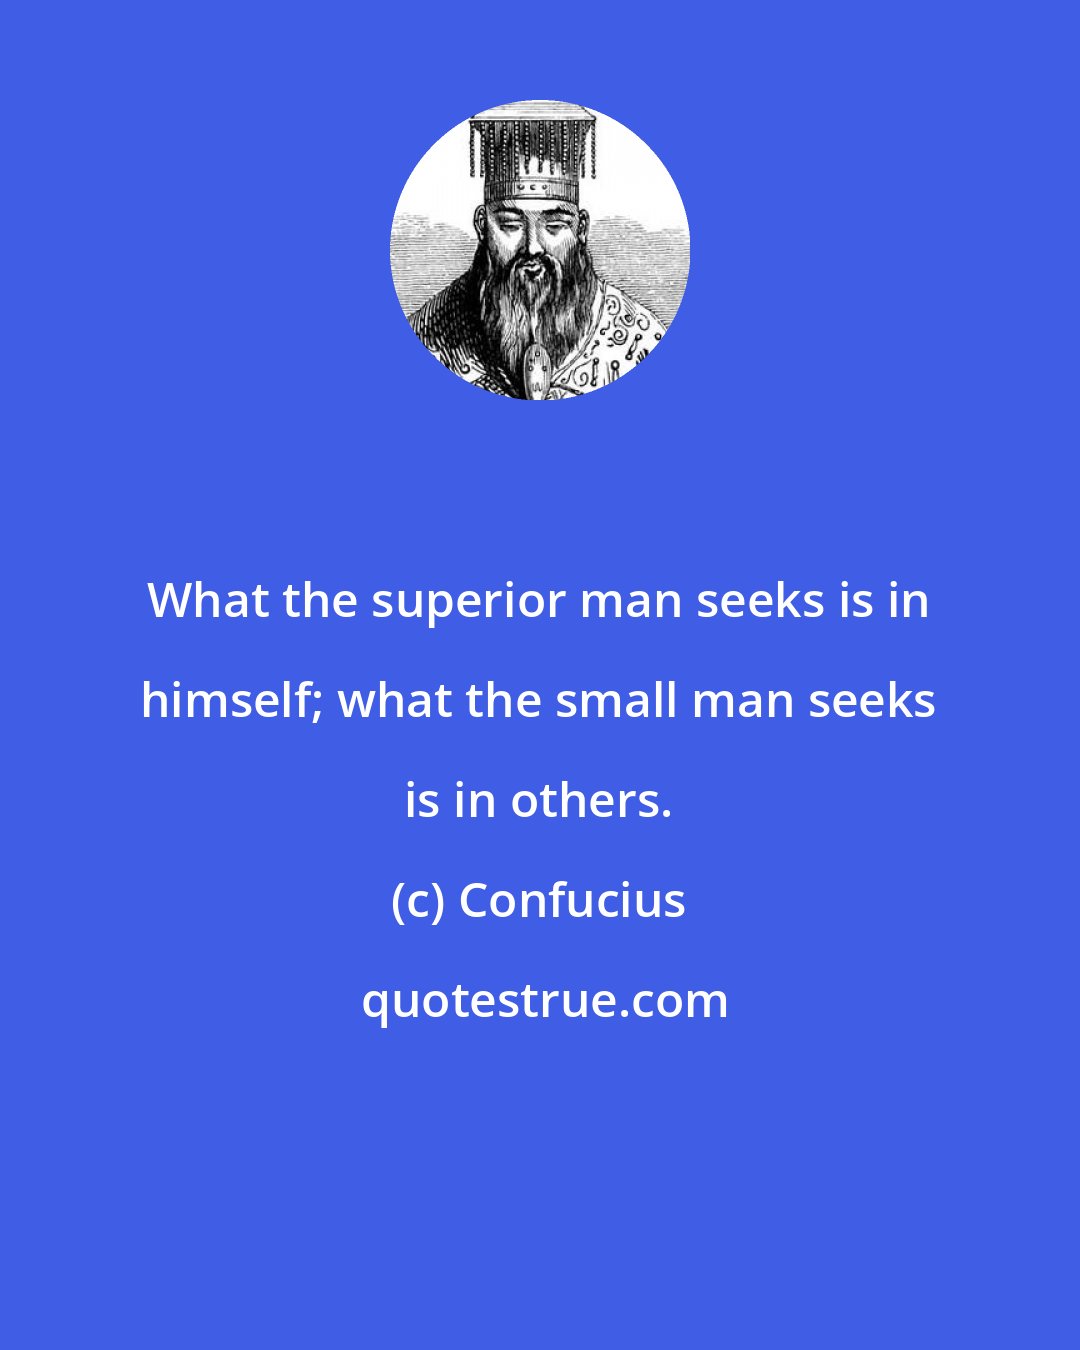 Confucius: What the superior man seeks is in himself; what the small man seeks is in others.